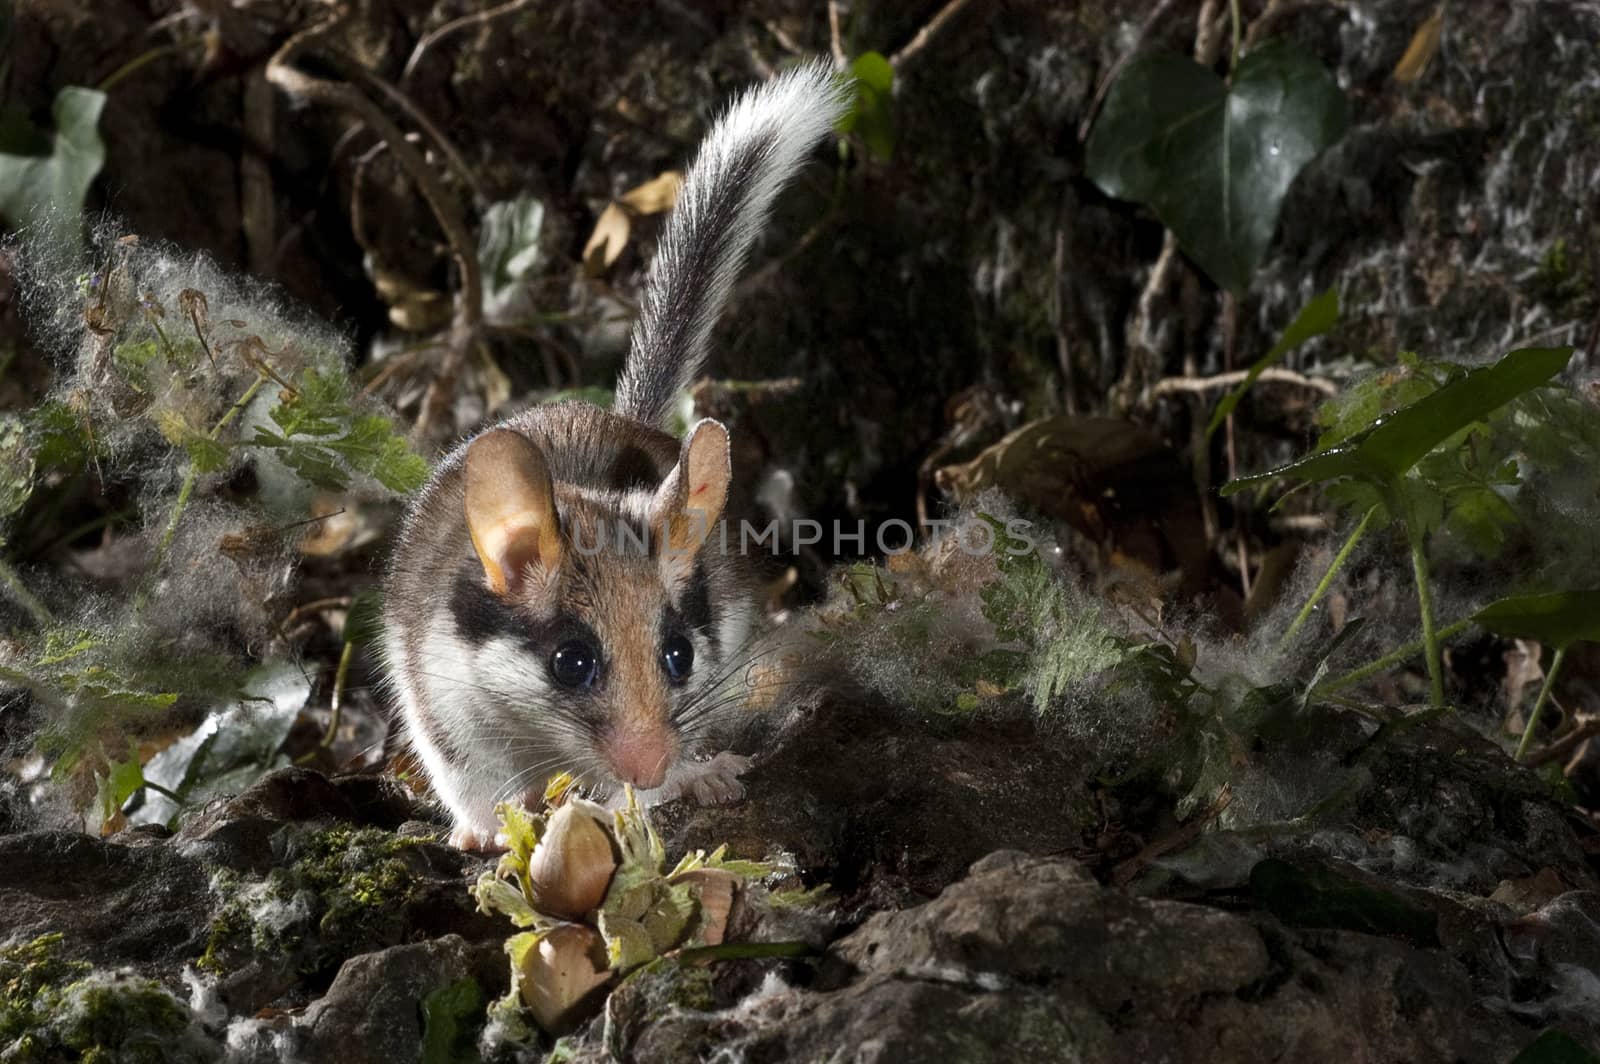 Garden Dormouse, Eliomys Quercinus, Looking for food in the coun by jalonsohu@gmail.com